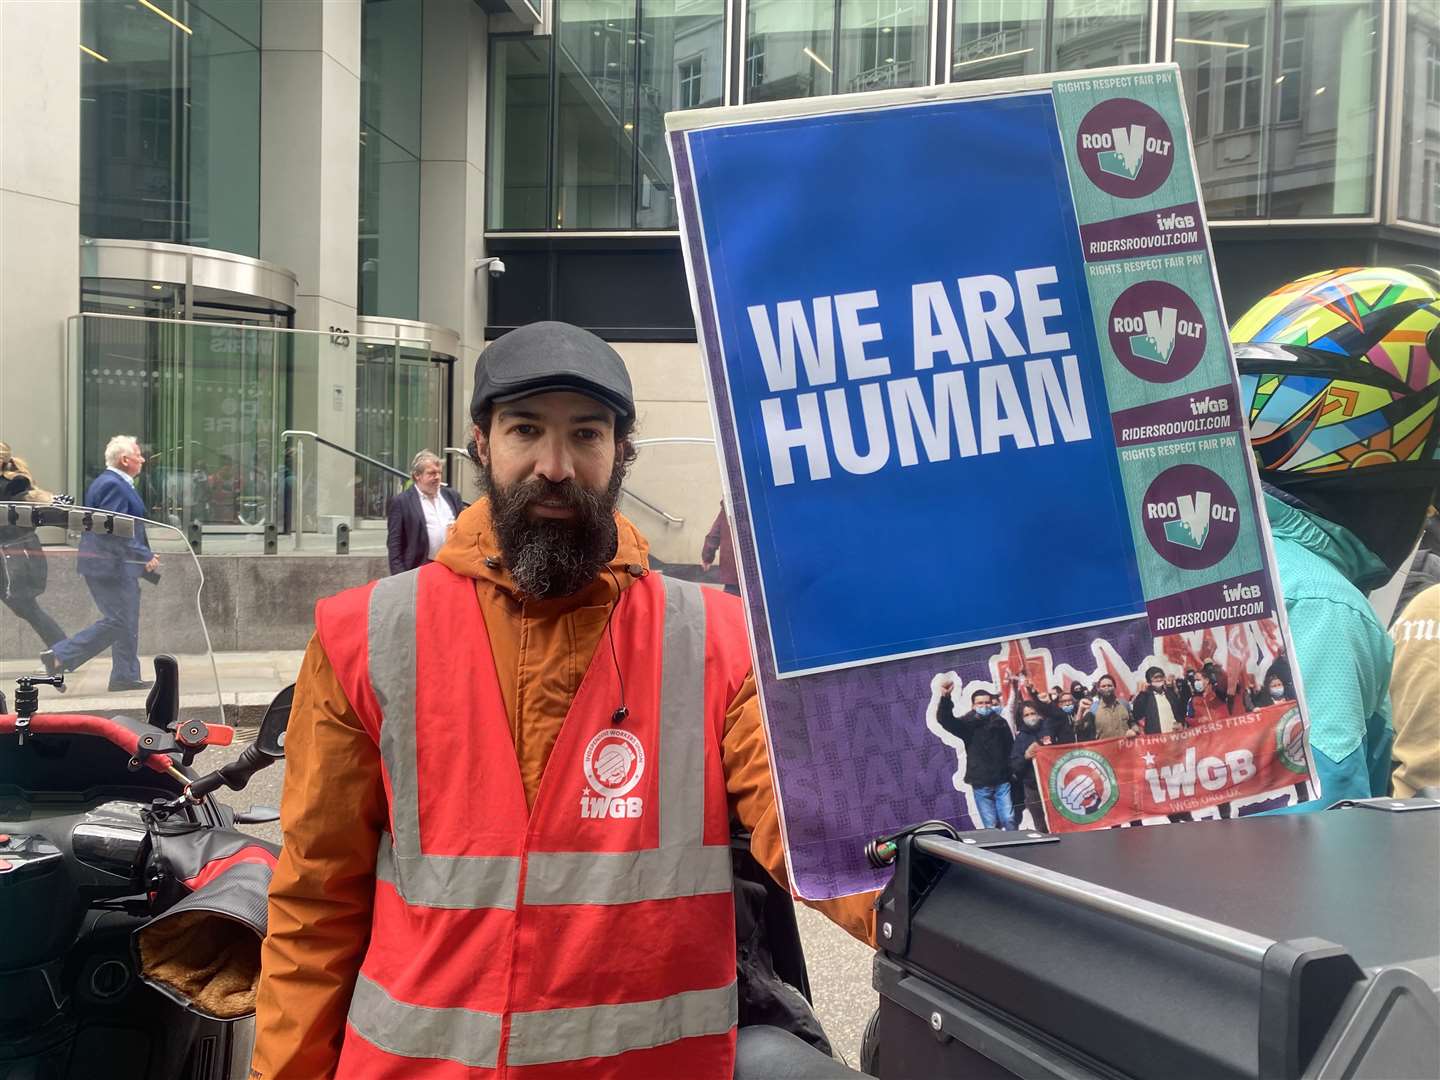 Celestino Pereira, 41, who has worked for Deliveroo for five years at the protest (Rebecca Speare-Cole/PA)